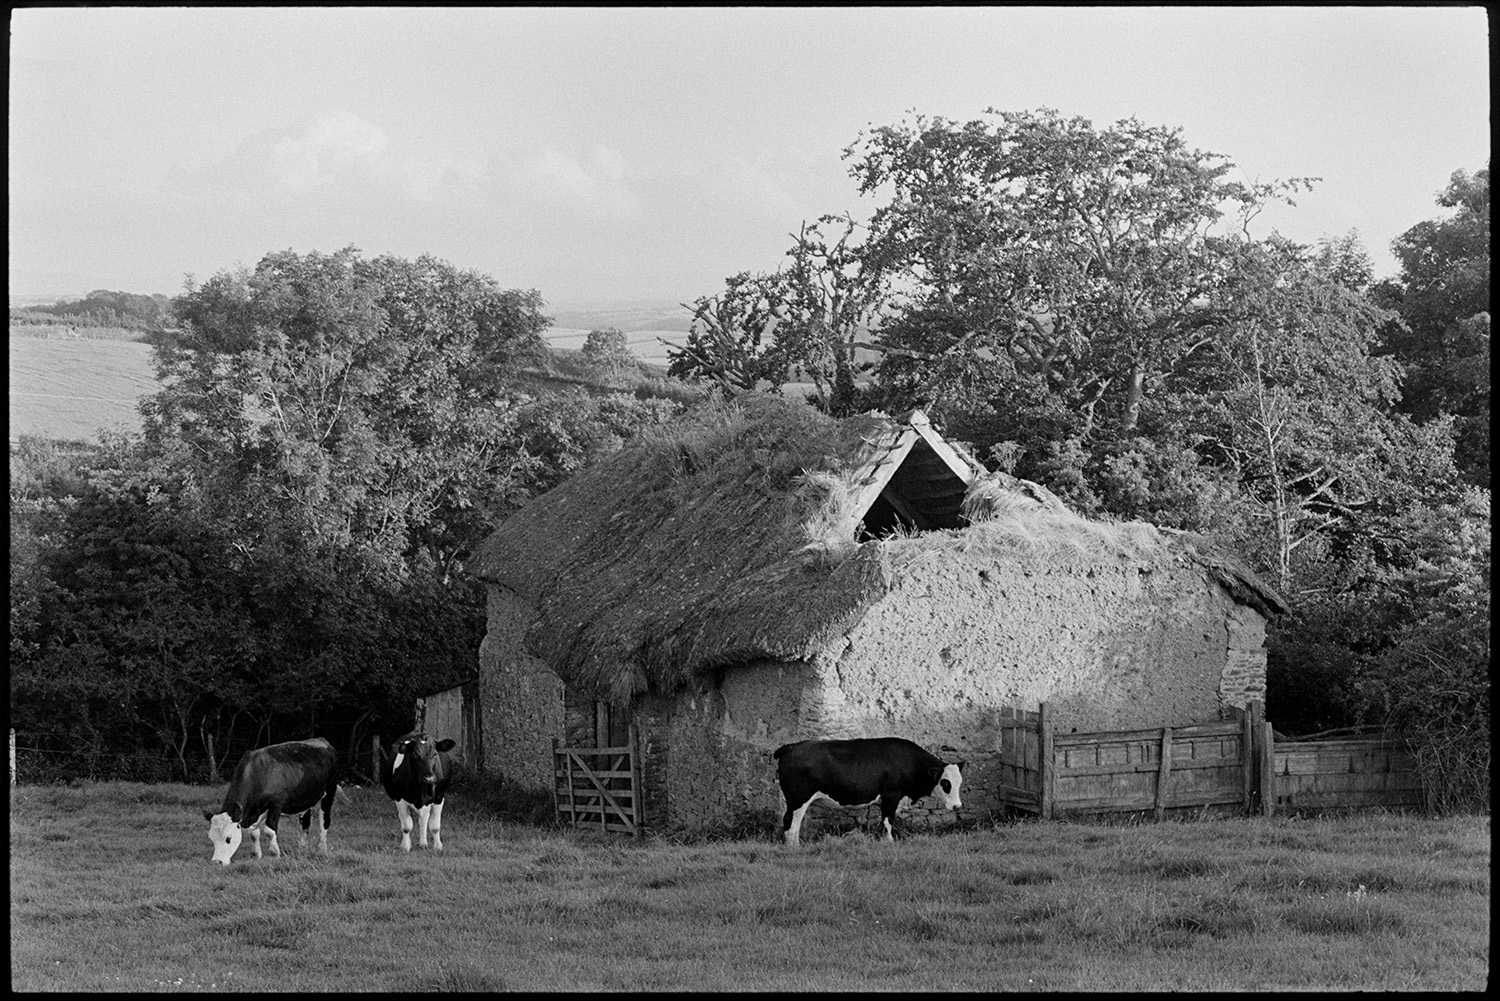 Ruined barn, cob and thatch now completely demolished, cattle. 
[Cattle grazing by a collapsing cob and thatch barn in a field near Beaford Wood. Some of the roof timbers of the barn are visible. The barn was later demolished.]